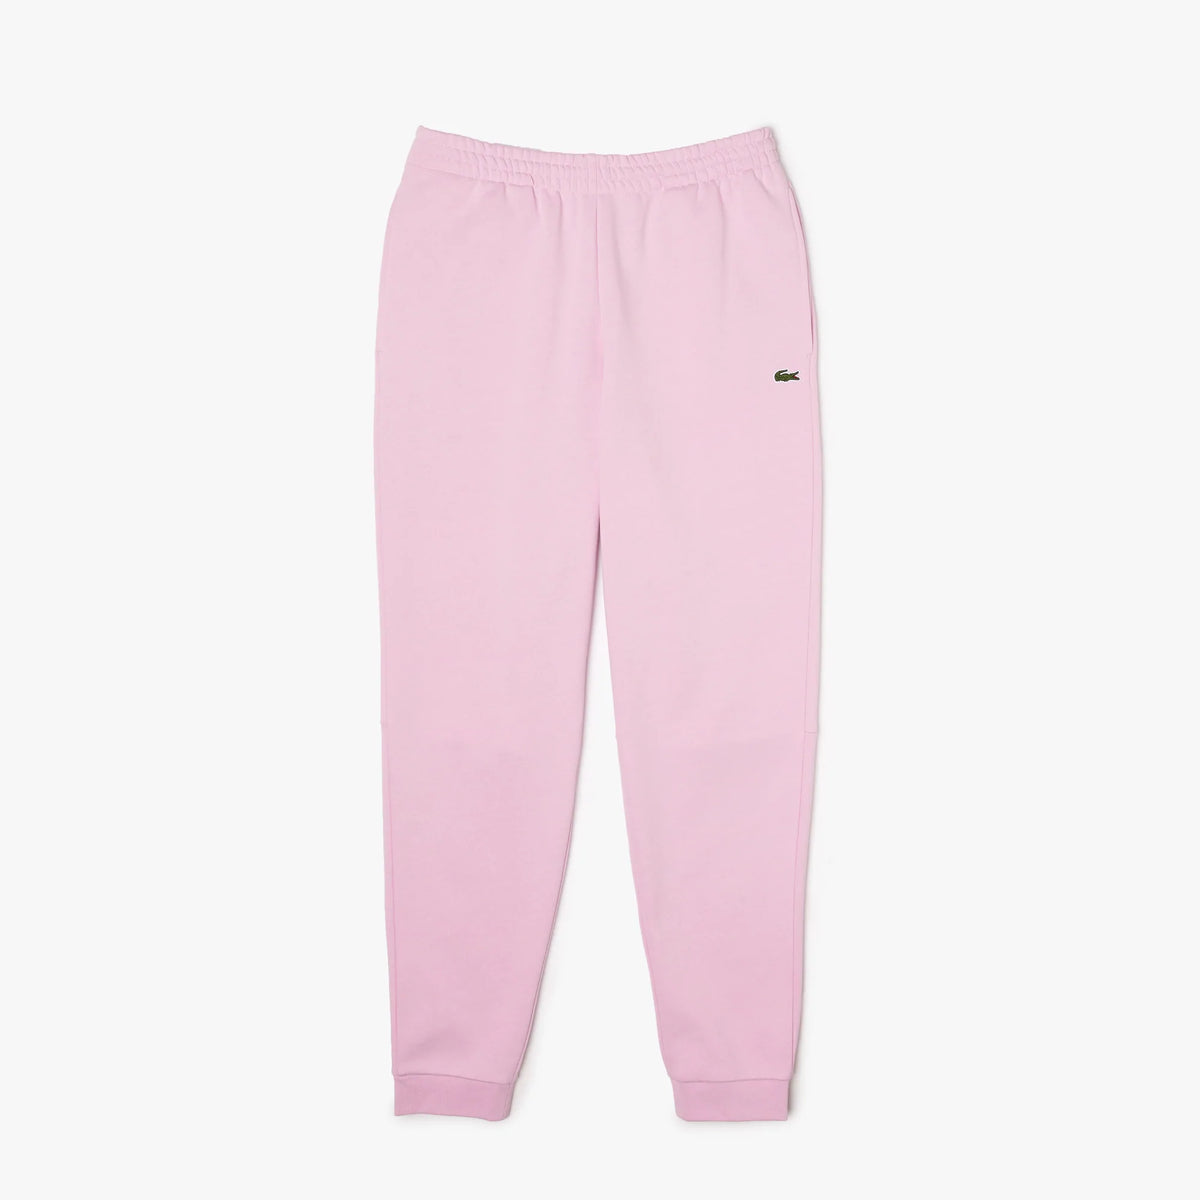 Lacoste Tapered Fit Fleece Trackpants - PINK